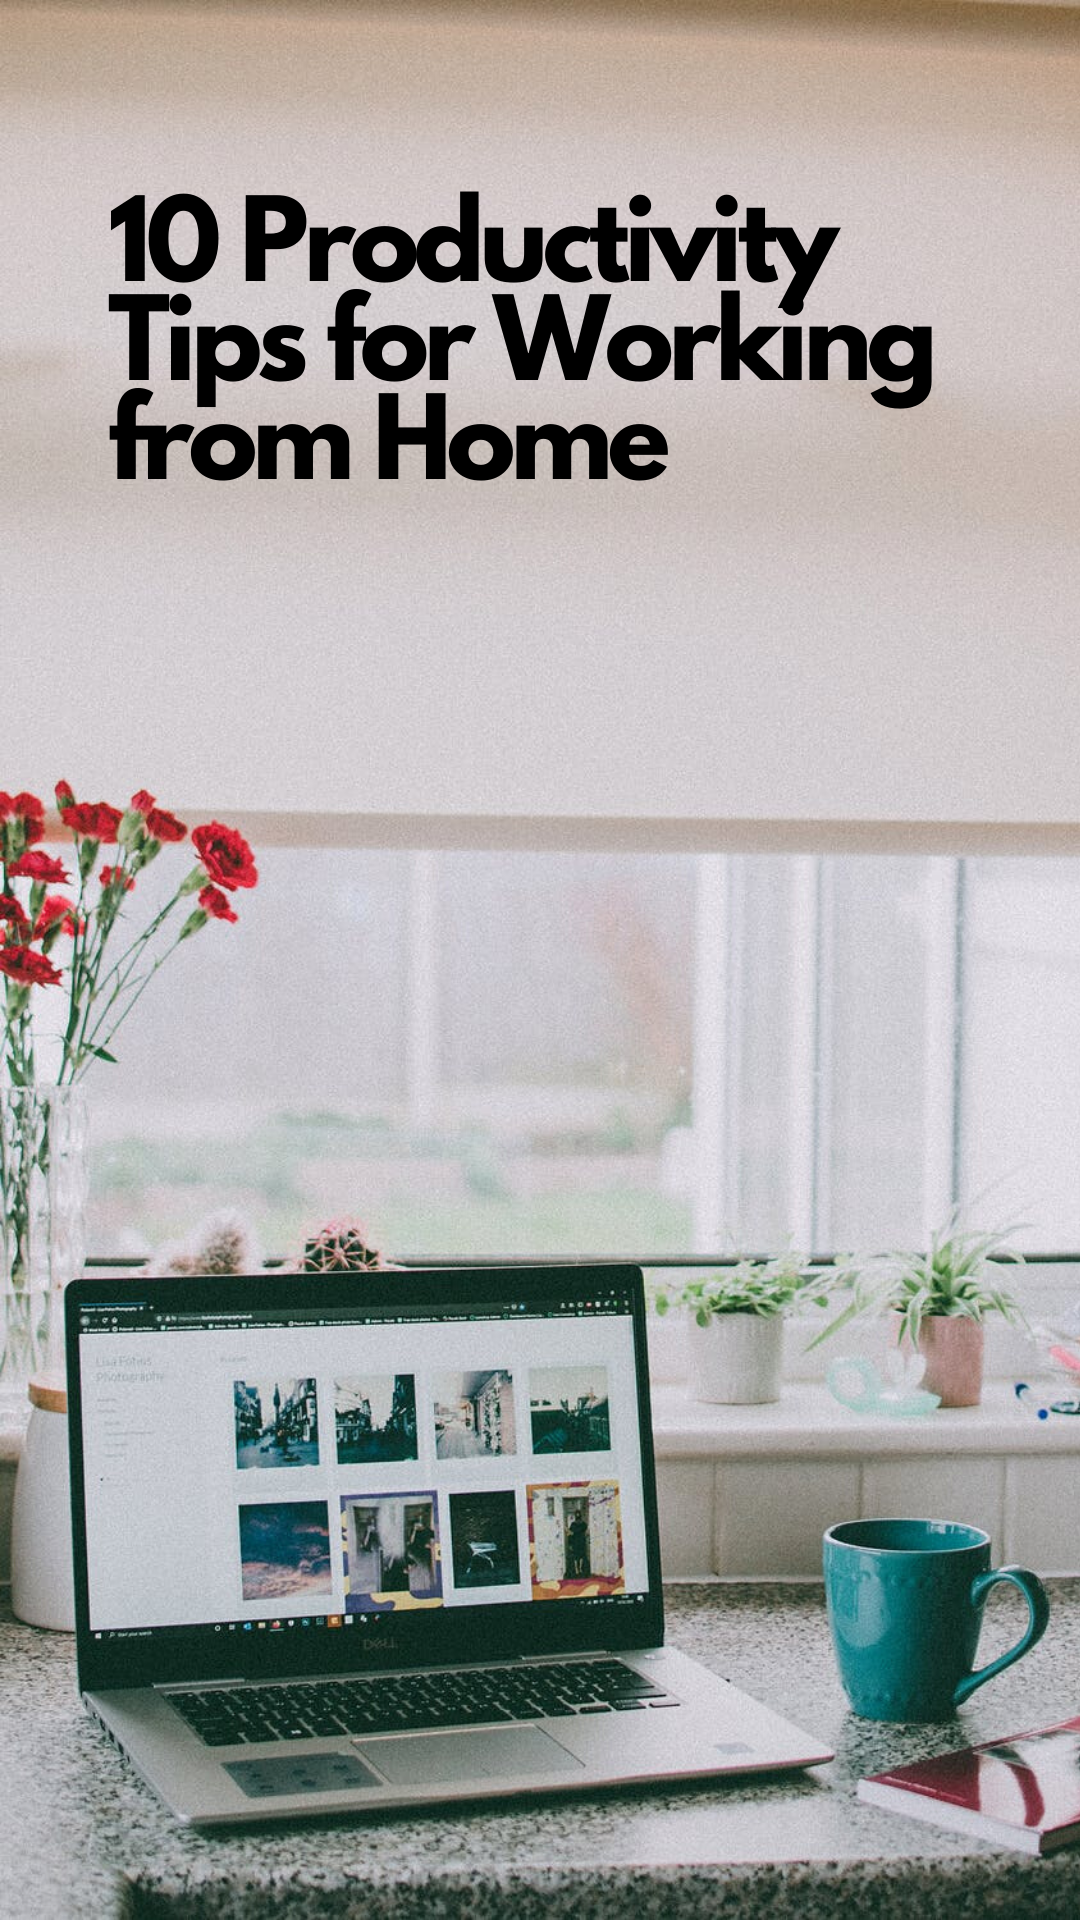 10 Productivity Tips for Working From Home